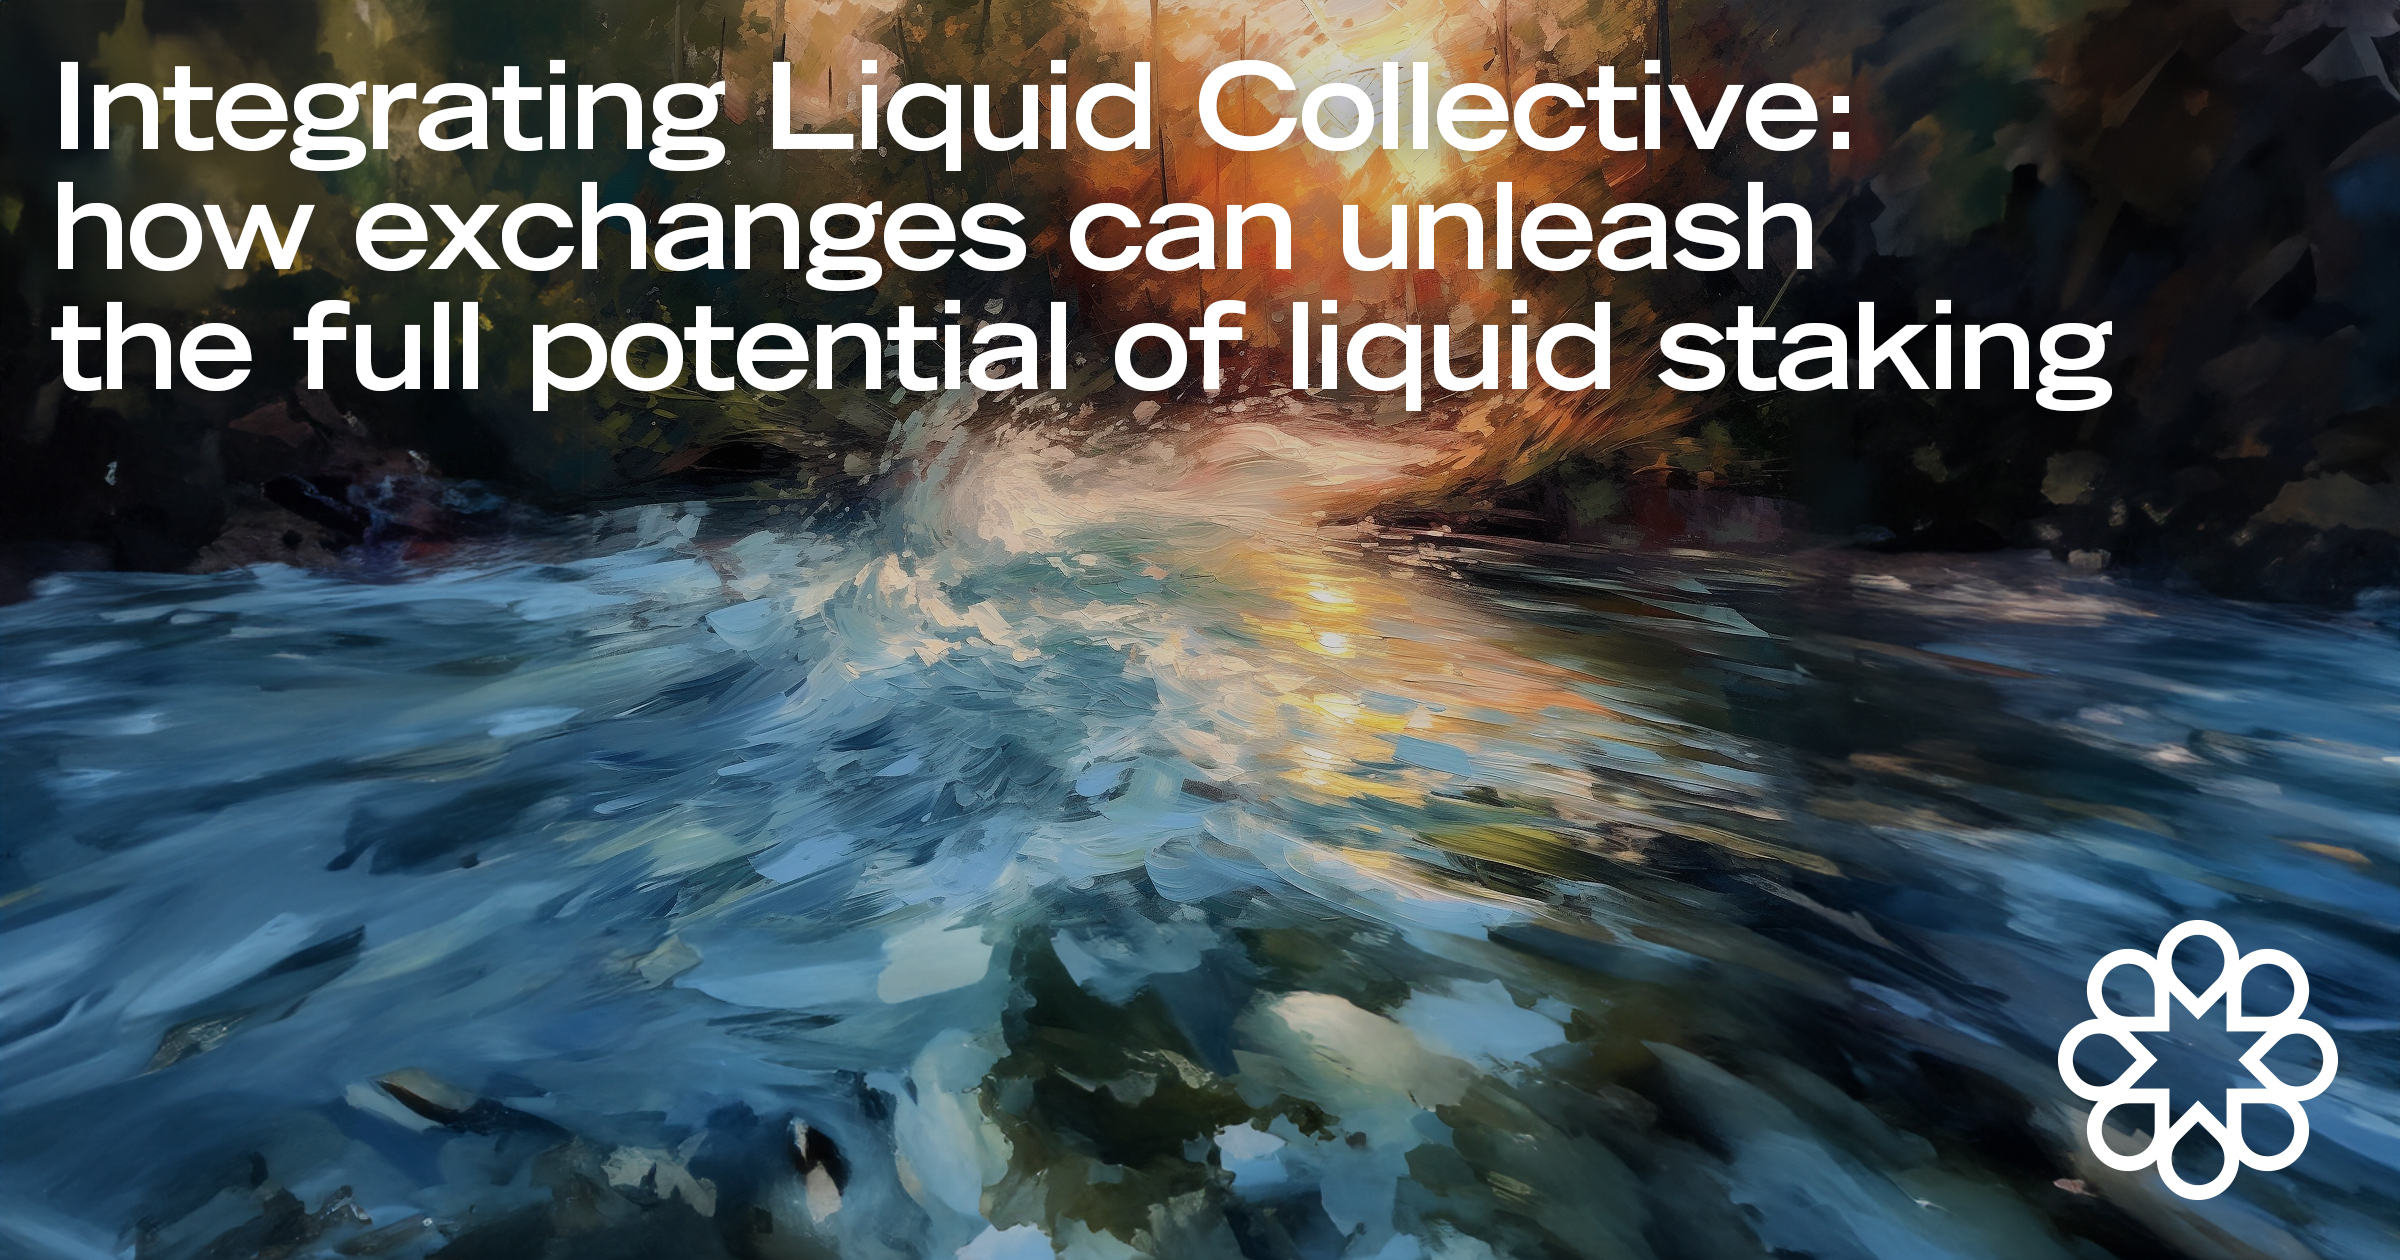 Integrating Liquid Collective: how exchanges can unleash the full potential of liquid staking